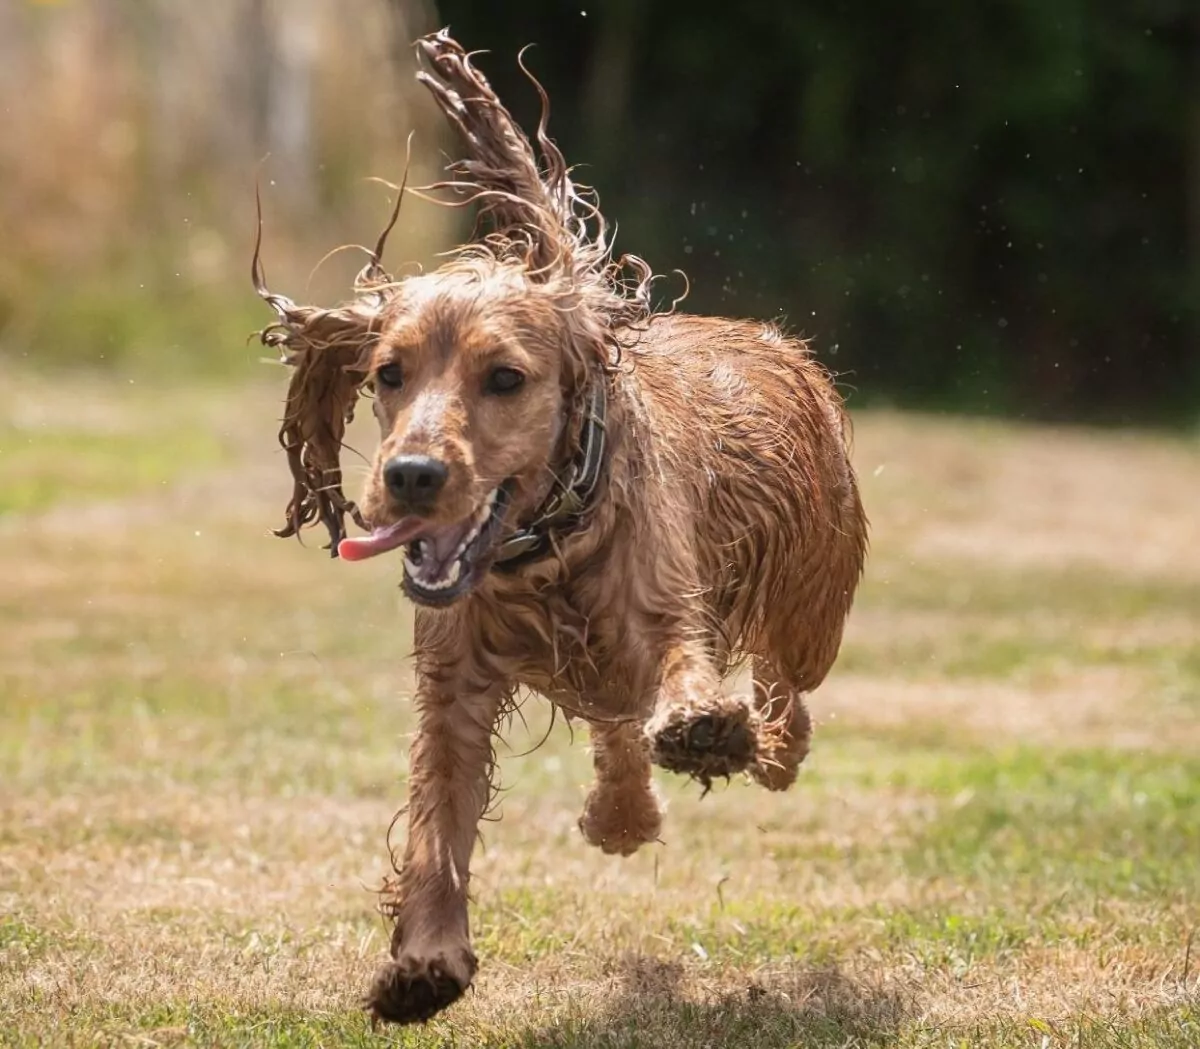 Wet Cocker spaniel running through the doggy day care fields